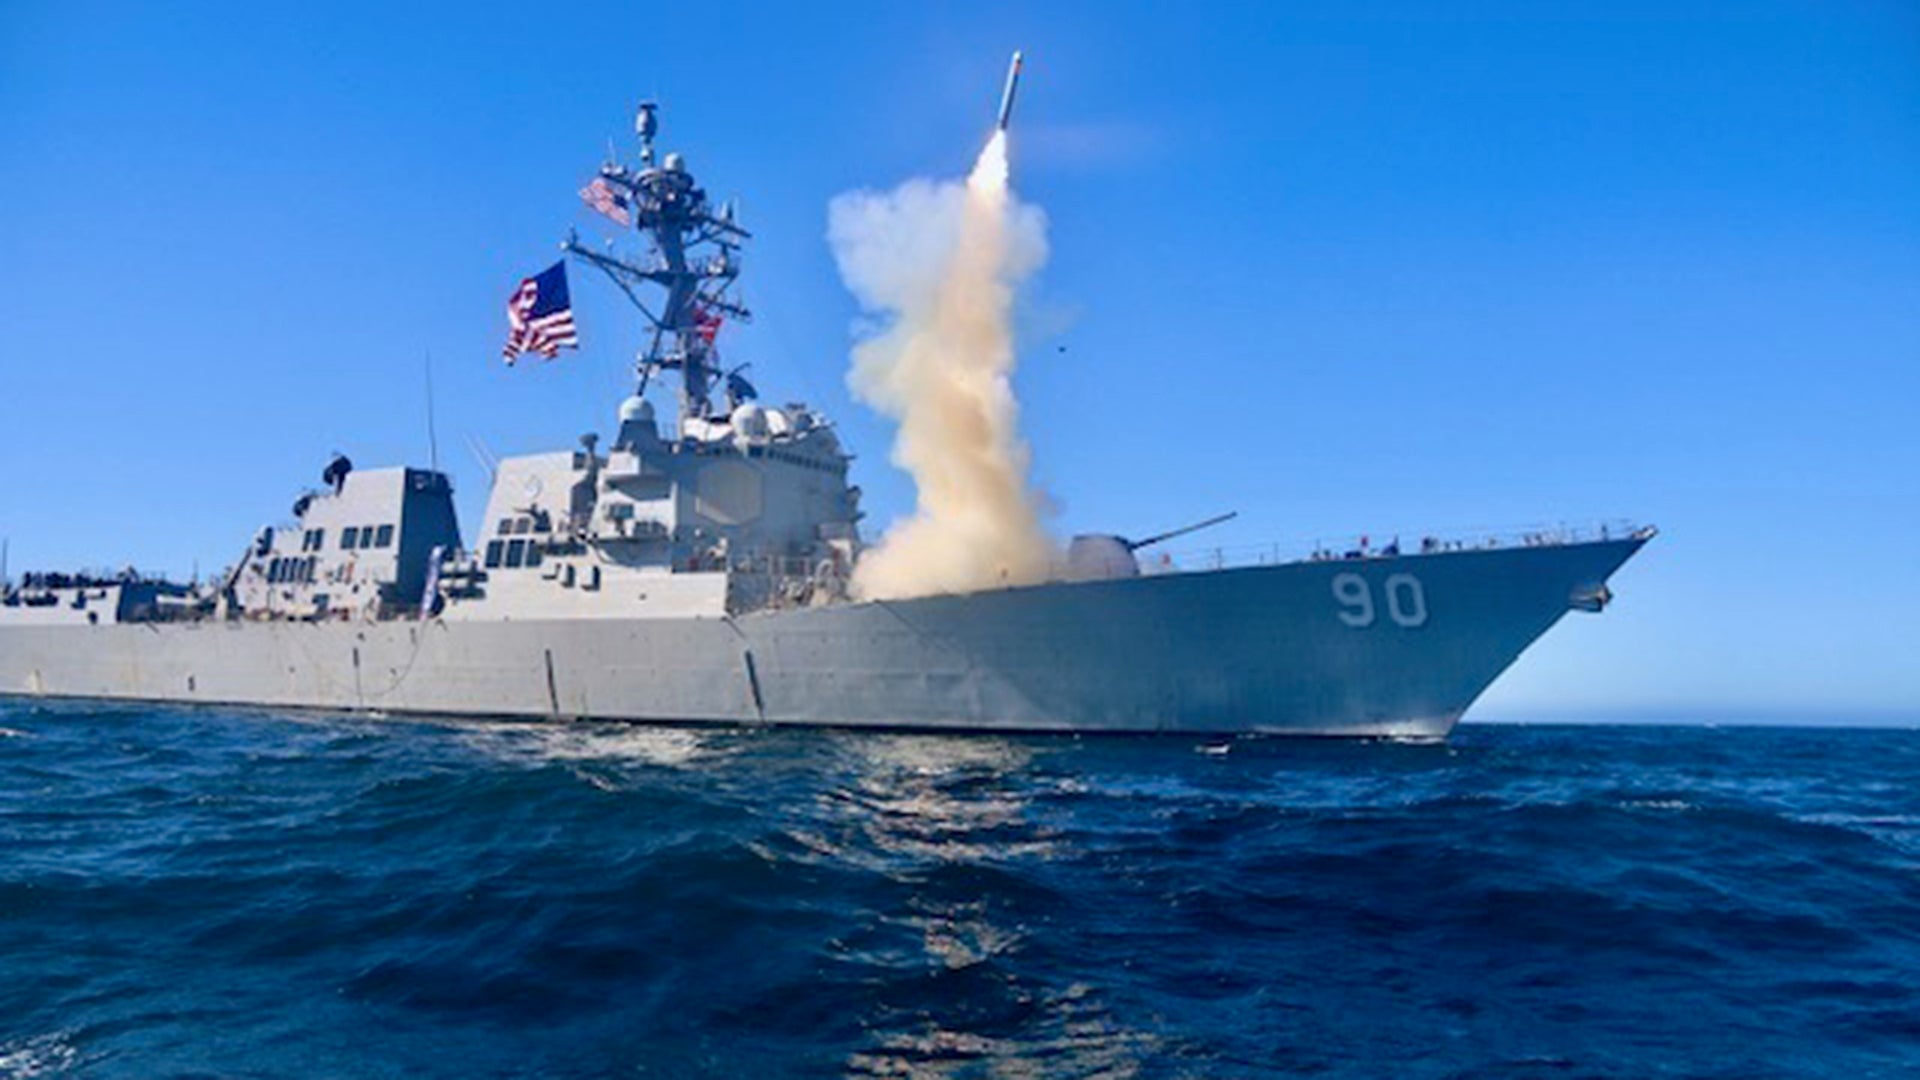 Military buying more missiles and other weapons to fight China, Russia